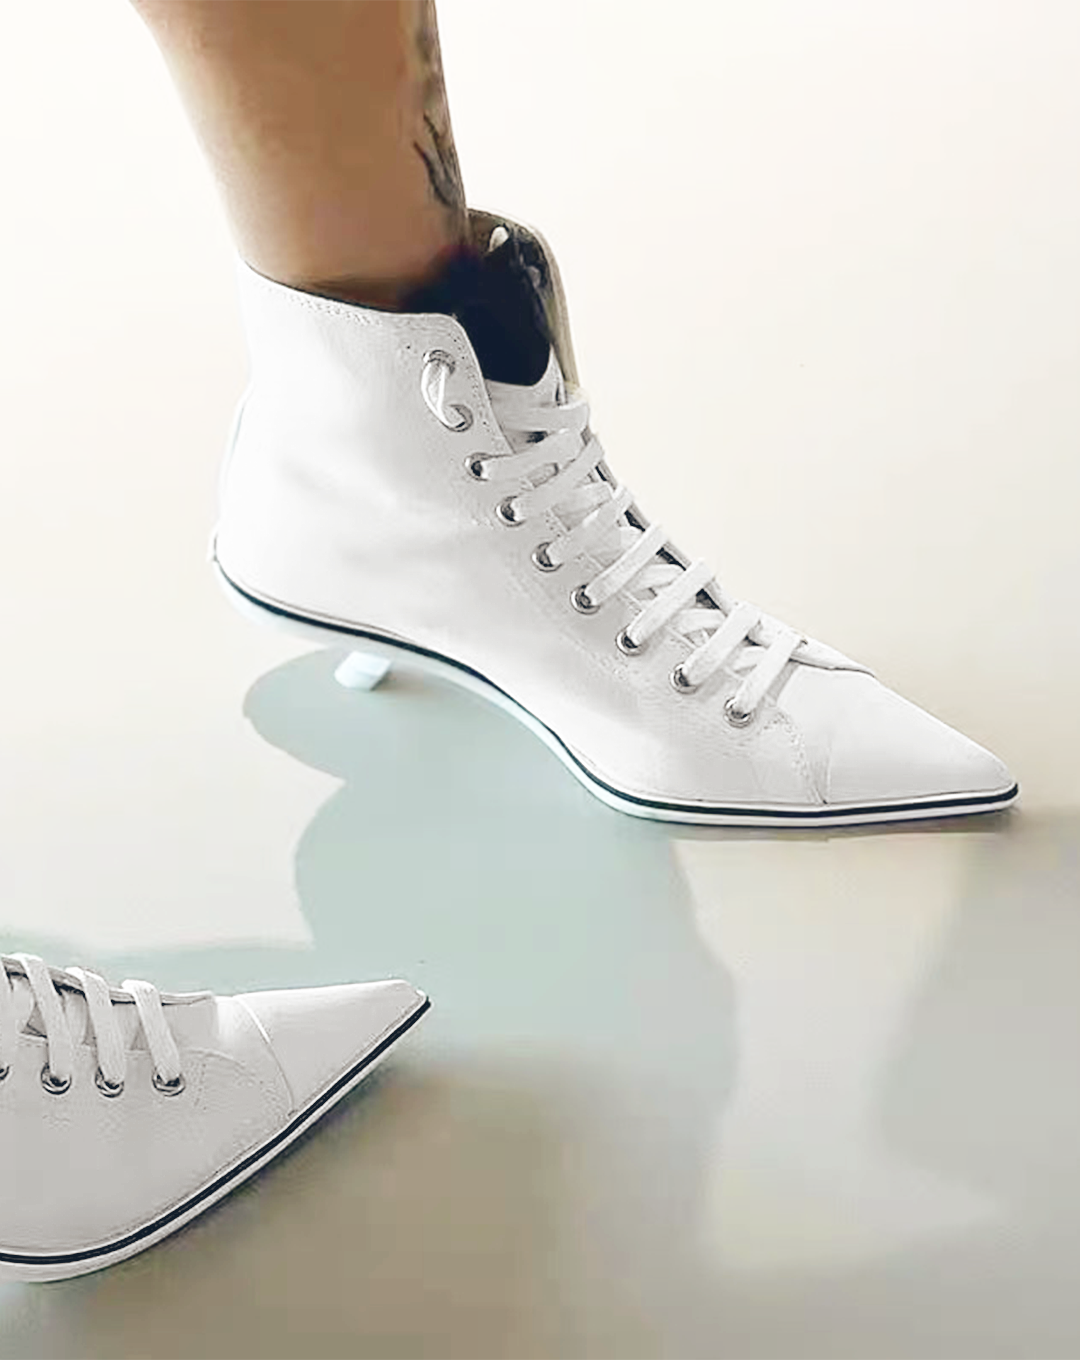 ♀Sneaker Style Pointed Toe Shoes